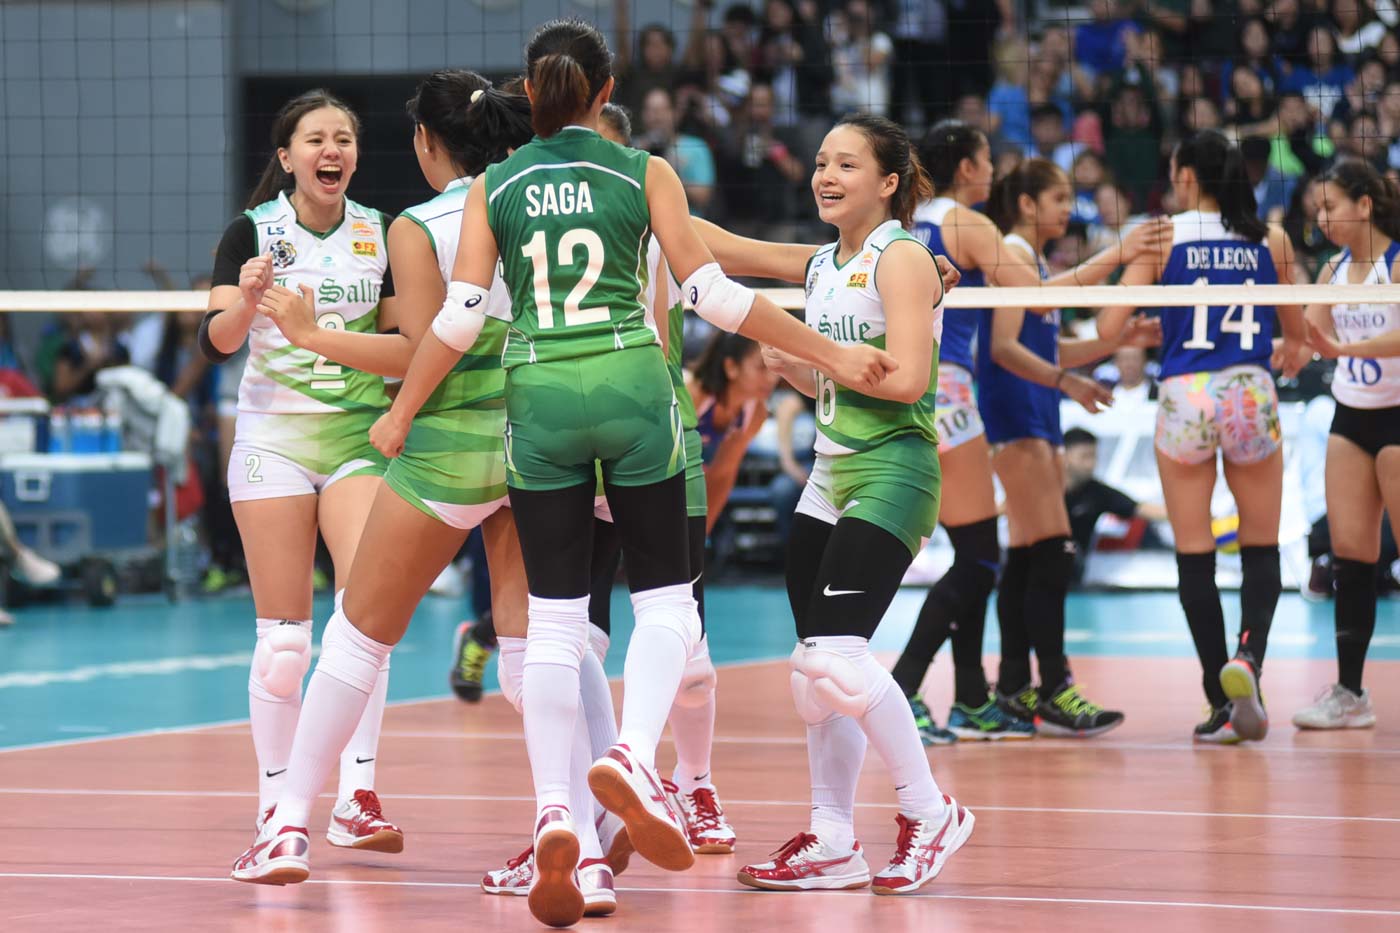 STILL DOMINANT. The La Salle Lady Spikers show off their fine form in the opening weekend. Photo by Josh Albelda/Rappler
 